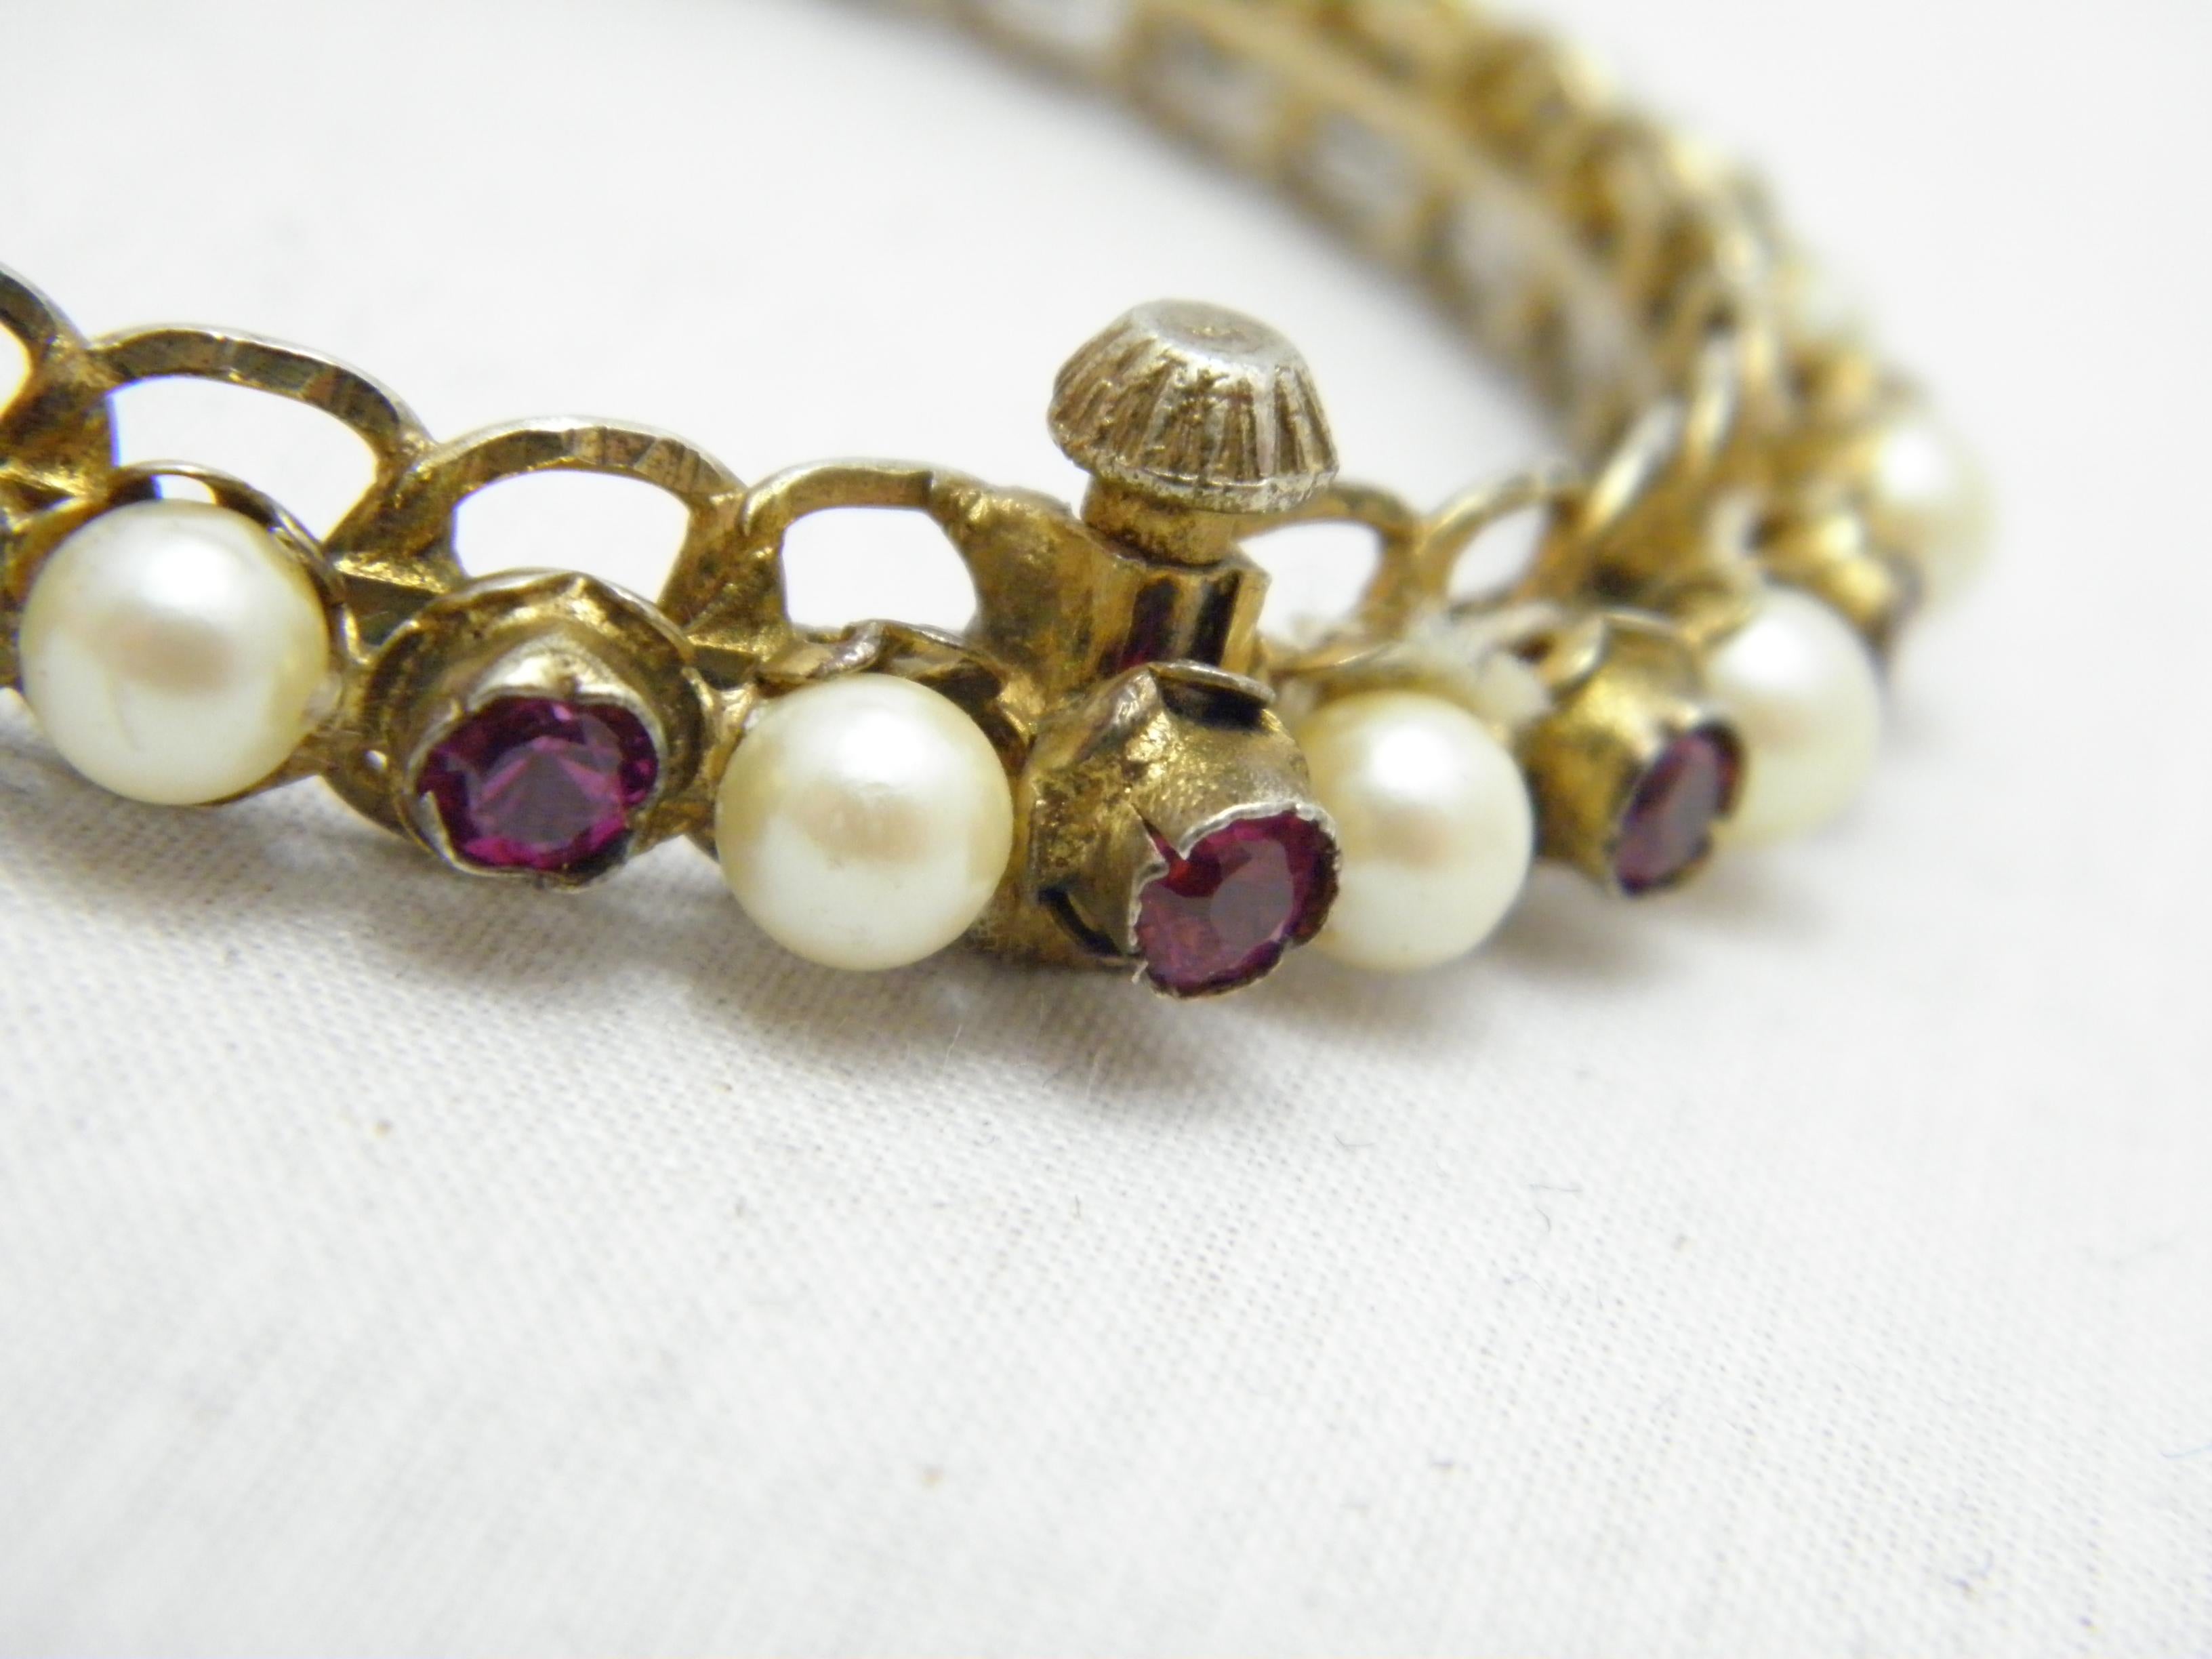 Antique 9ct Gold 'Rolled' Ruby Pearl Paste Hinged Bracelet Bangle 375 Purity In Good Condition For Sale In Camelford, GB